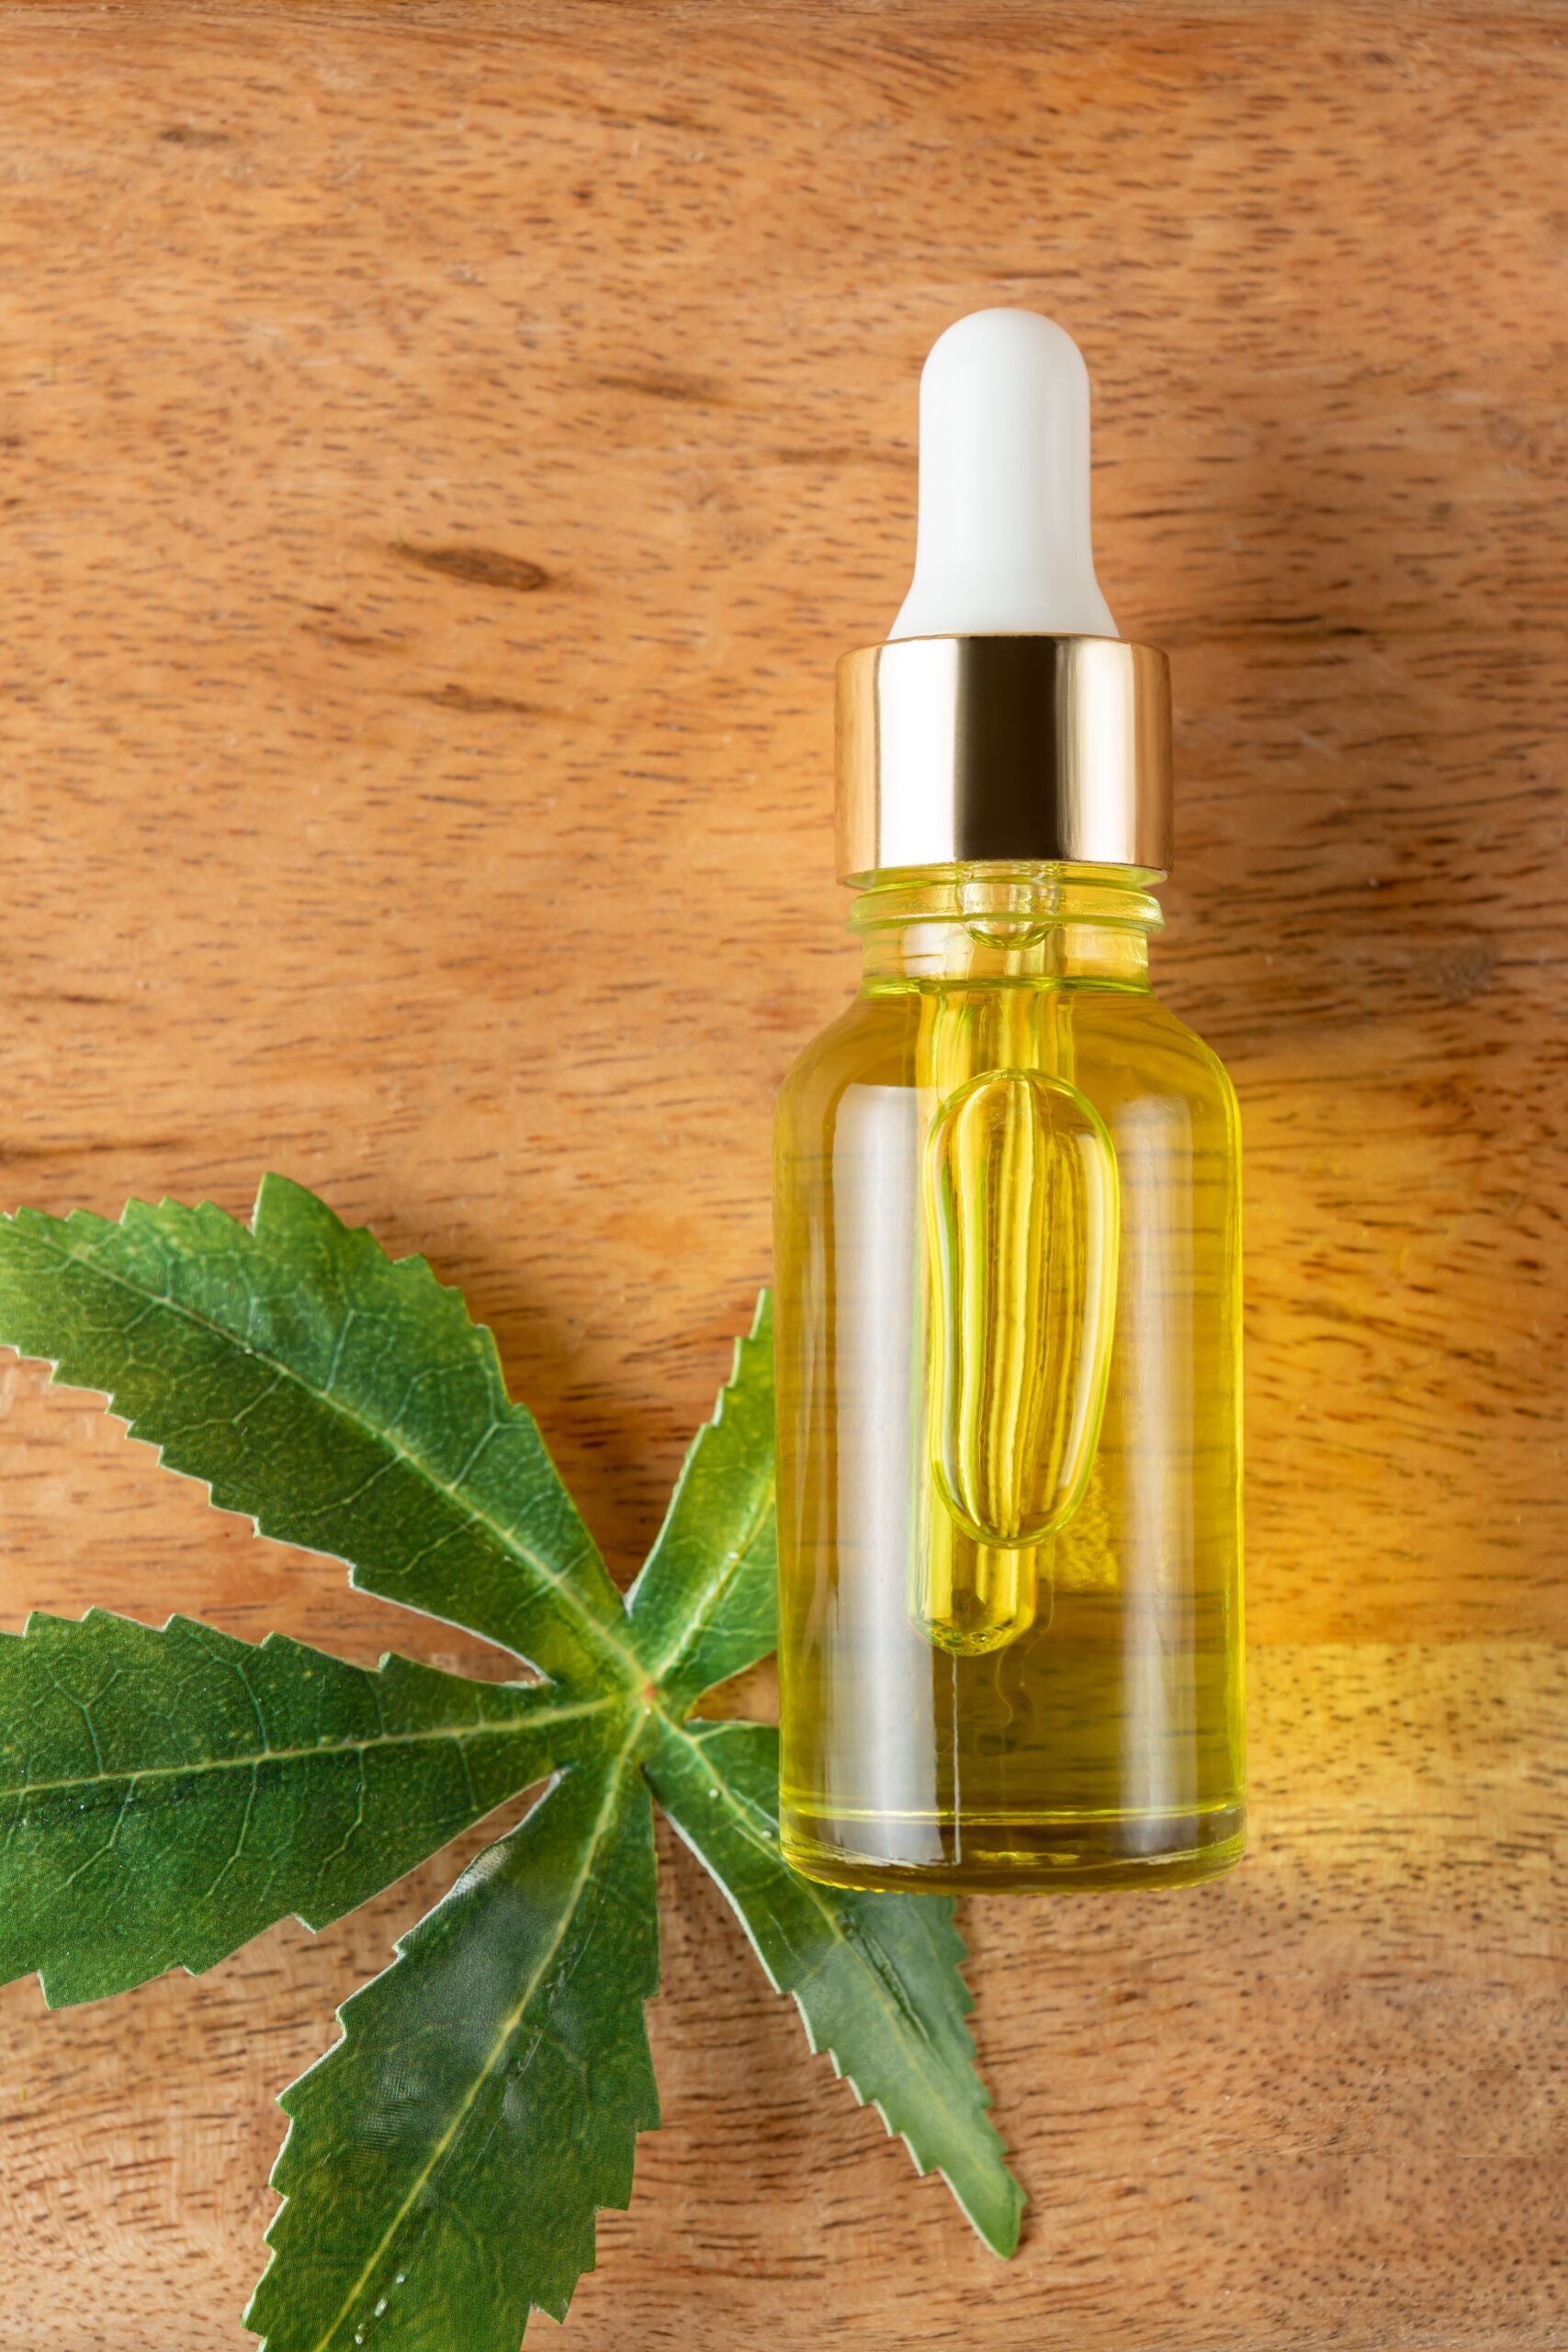 Cannabis leaf Serum, cosmetics, hemp oil. Bottle or vial with a dropper and hemp leaf on wooden board. Natural cosmetics concept.